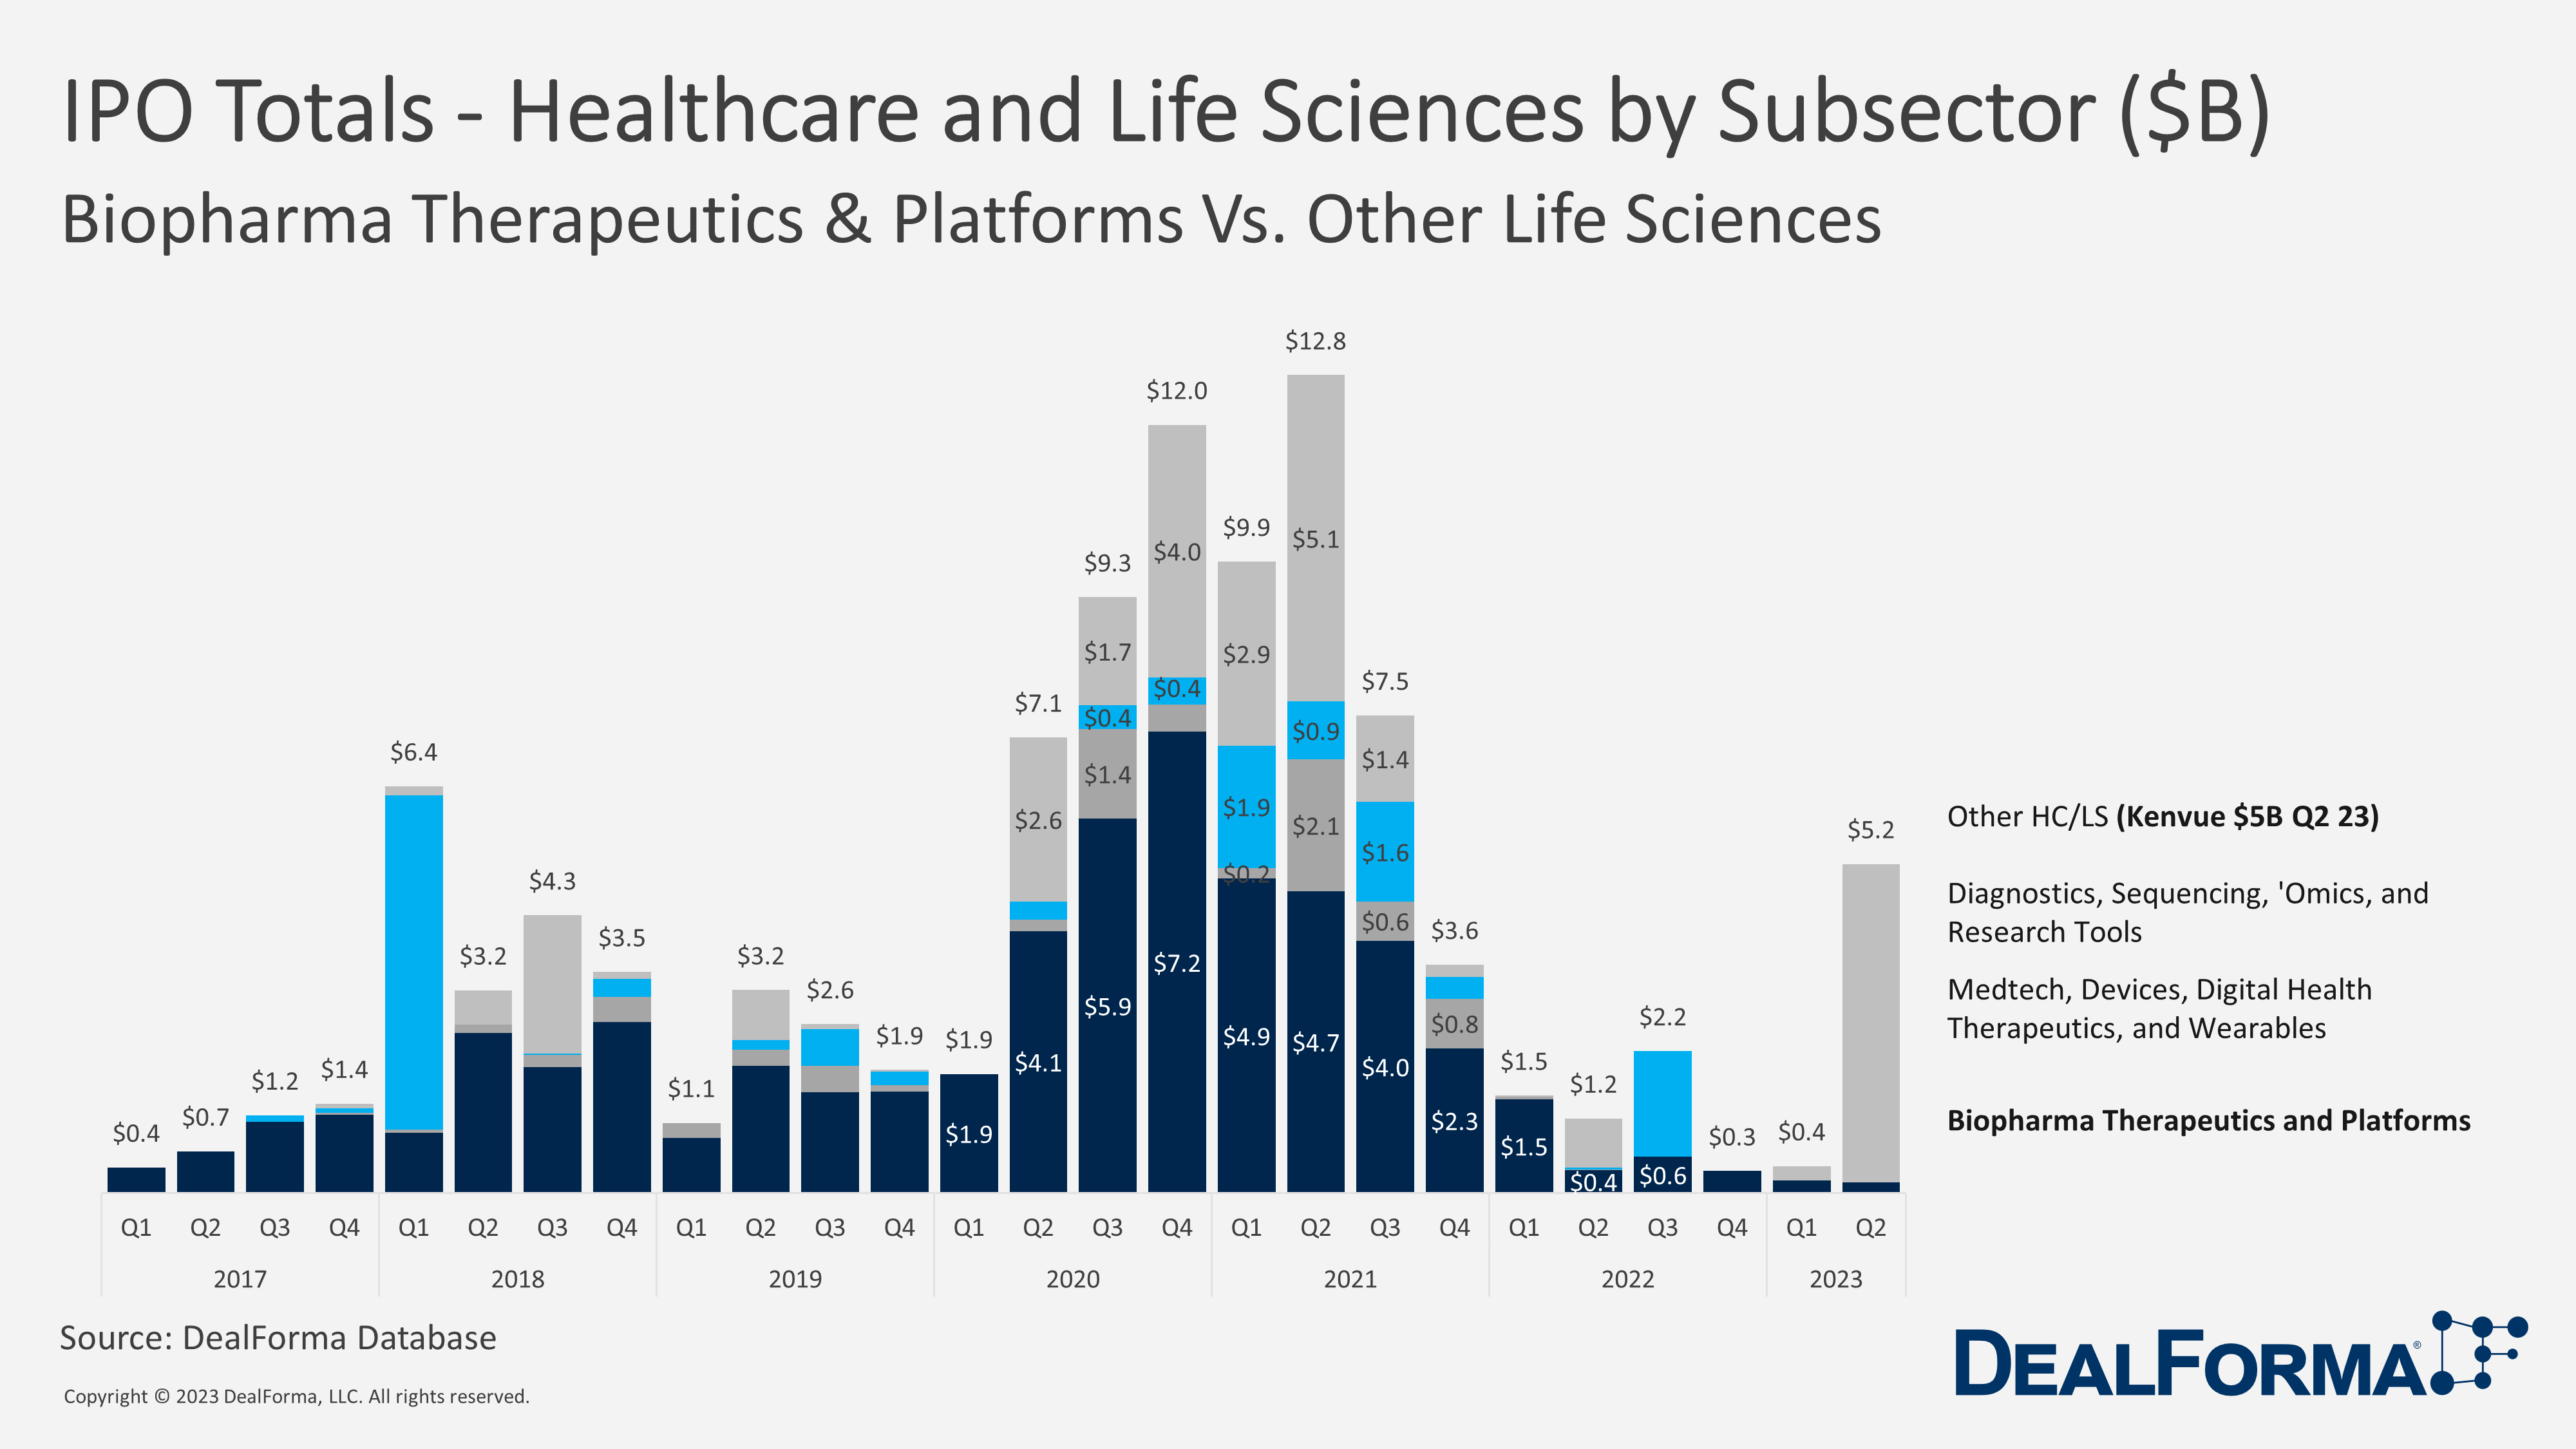 DealForma: IPO Totals - Healthcare and Life Sciences by Subsector. Biopharma Therapeutics and Platforms vs Other life sciences